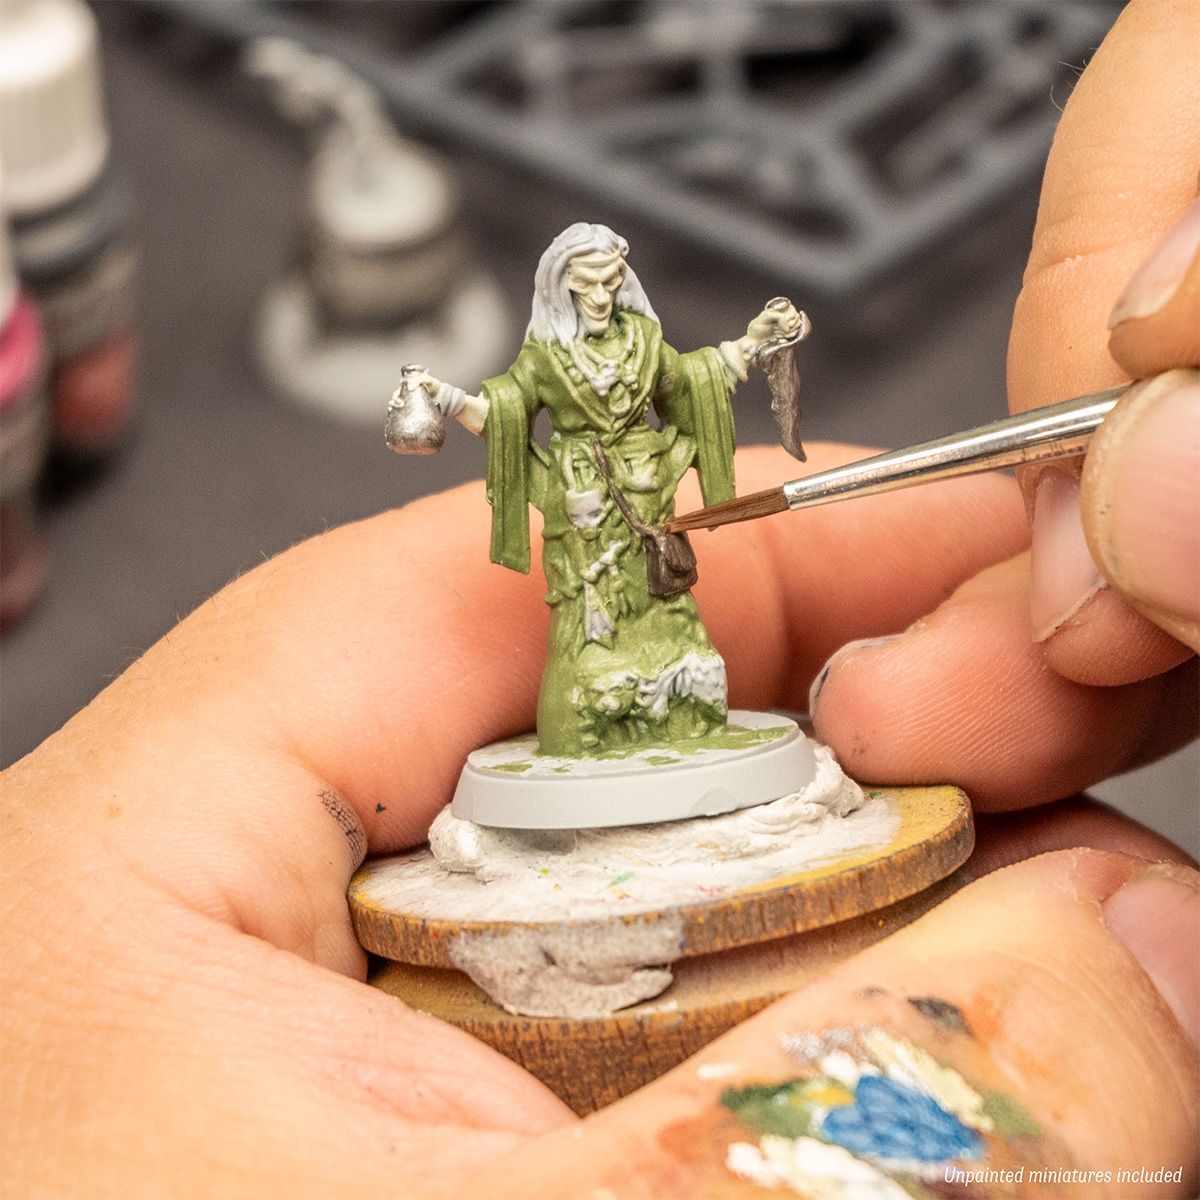 The Army Painter - Gamemaster: Wilderness Adventures Paint Set